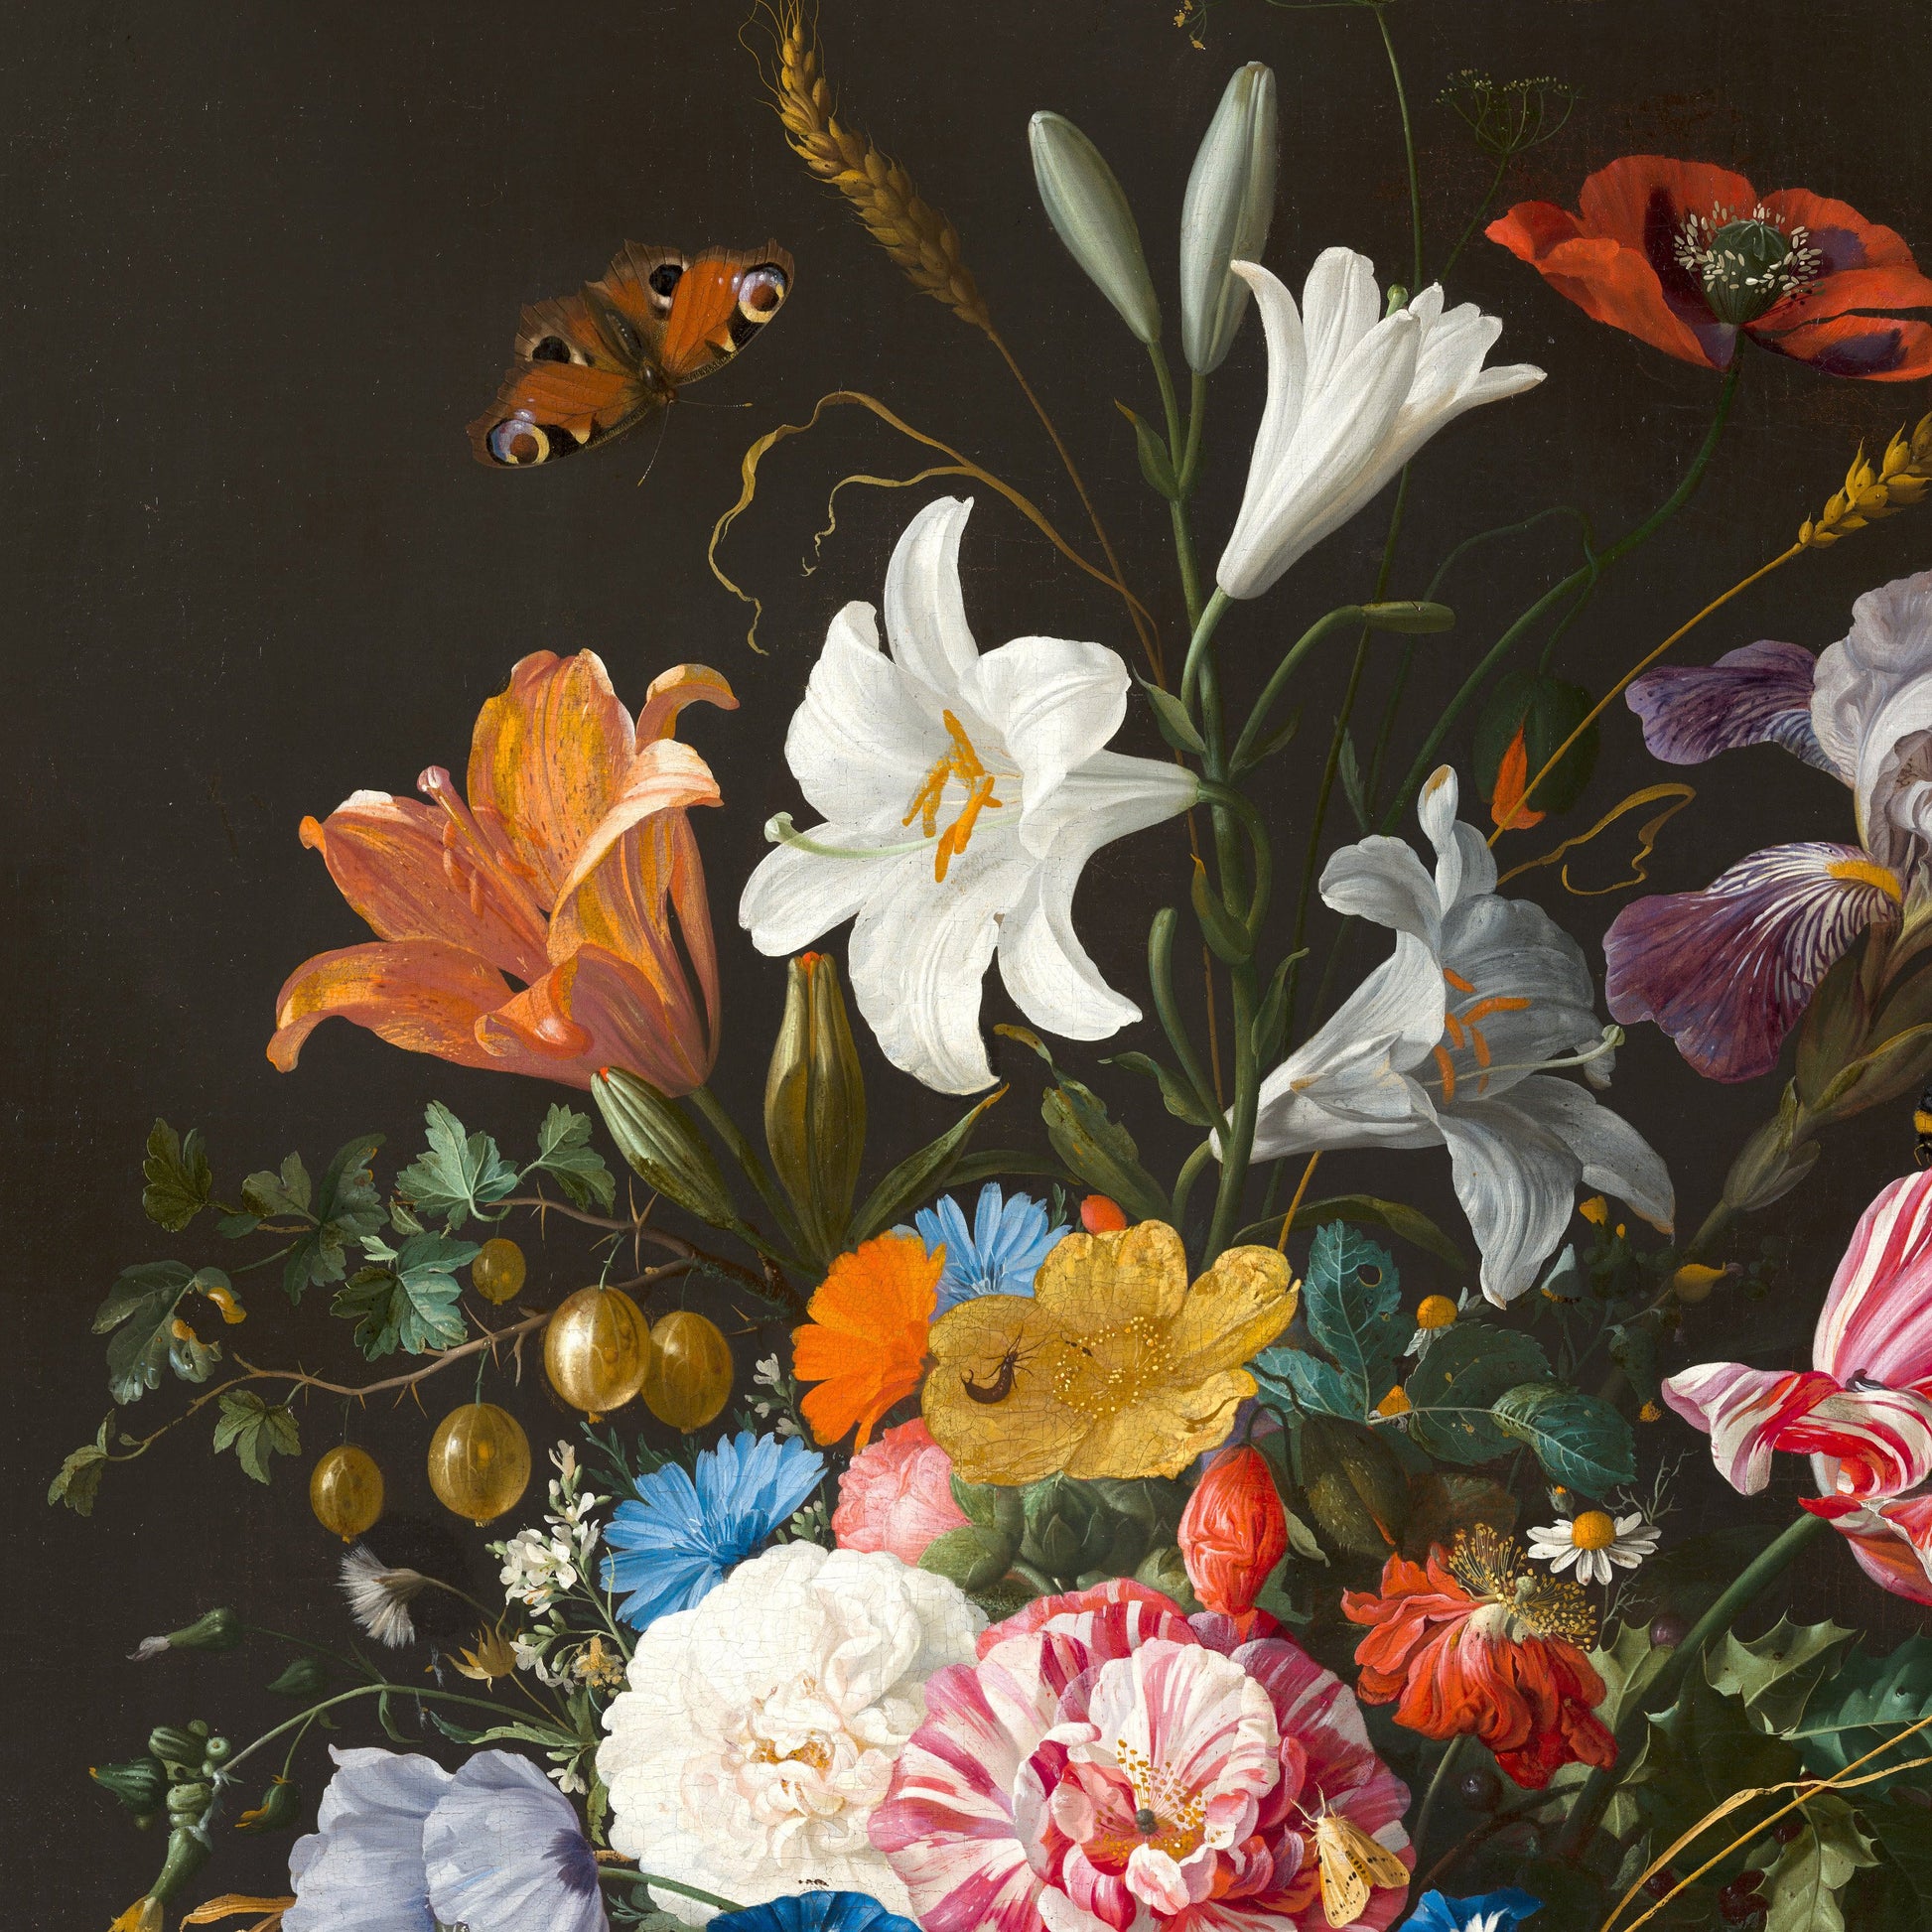 Vase of Flowers by Jan Davidsz de Heem, 3d Printed with texture and brush strokes looks like original oil-painting, code:307